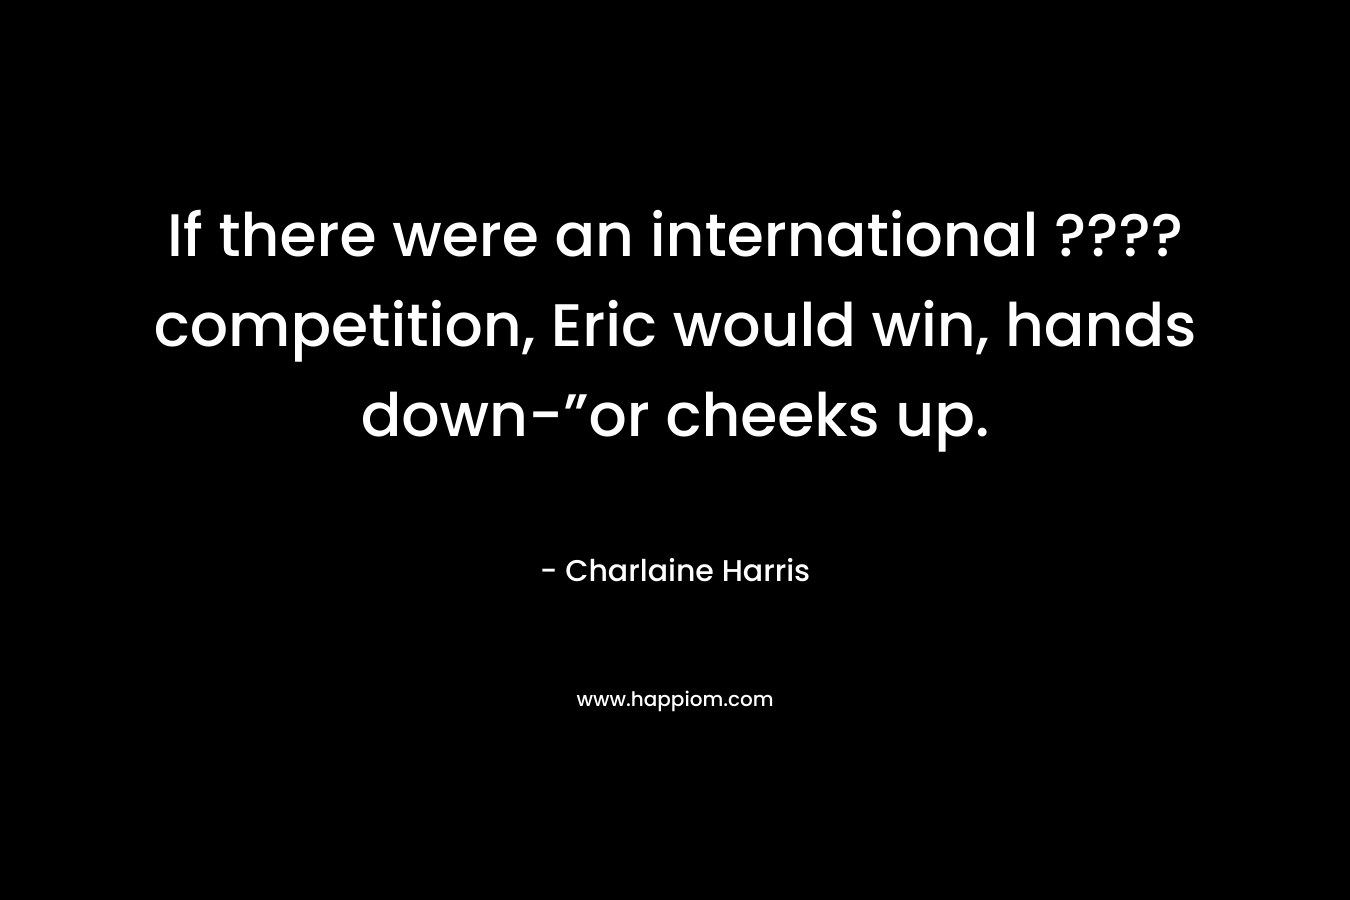 If there were an international ???? competition, Eric would win, hands down-”or cheeks up. – Charlaine Harris